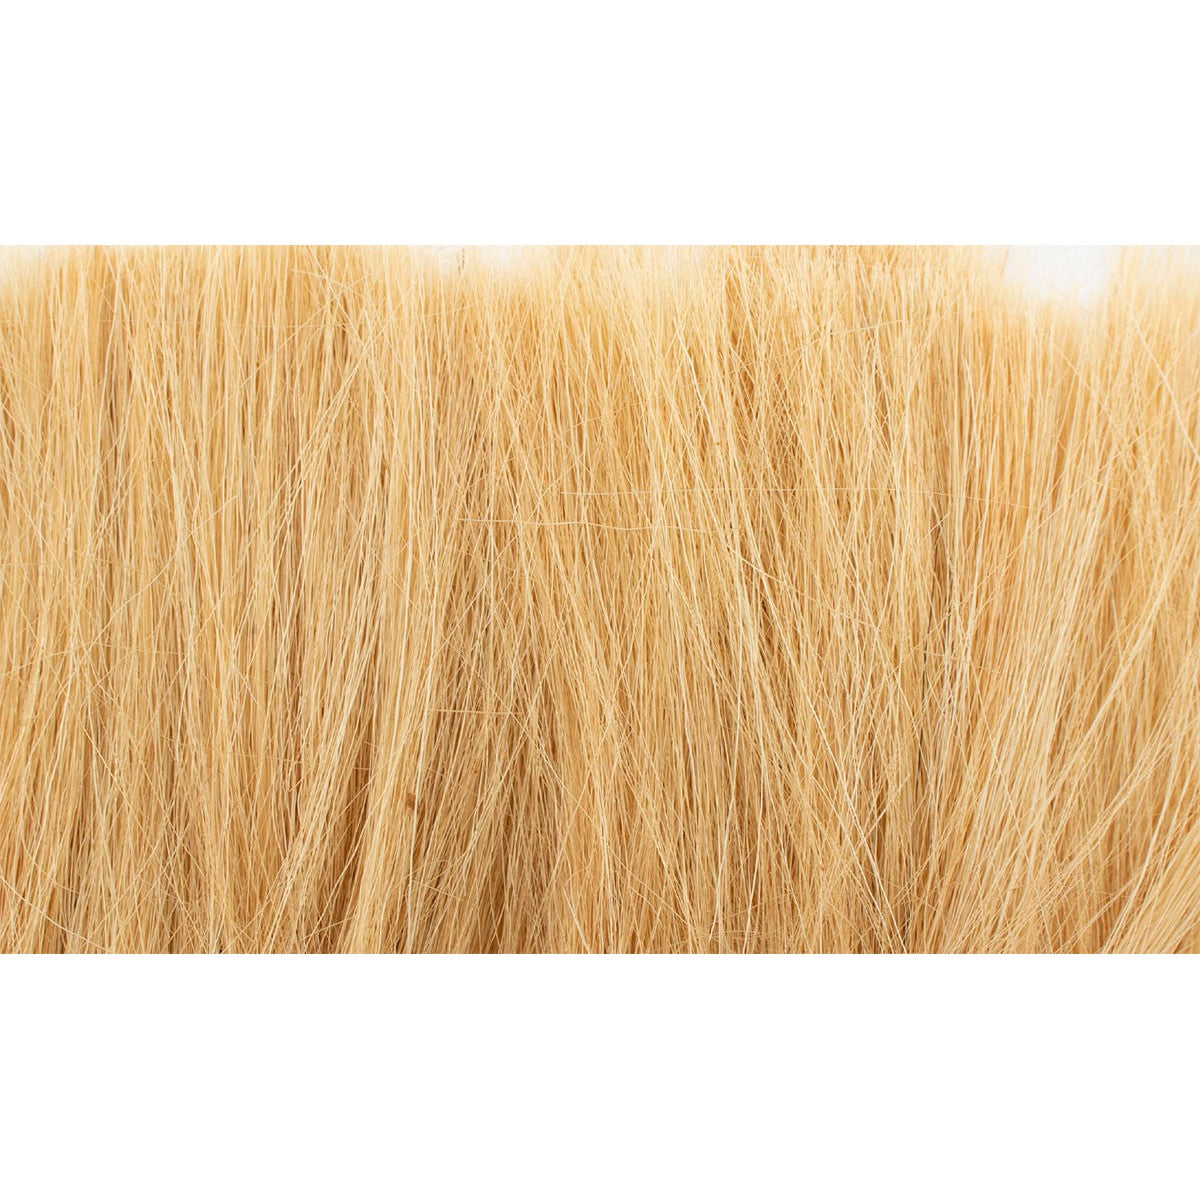 Tall Grass - Gold - Make custom tufts of grass with varying height by using Tall Grass